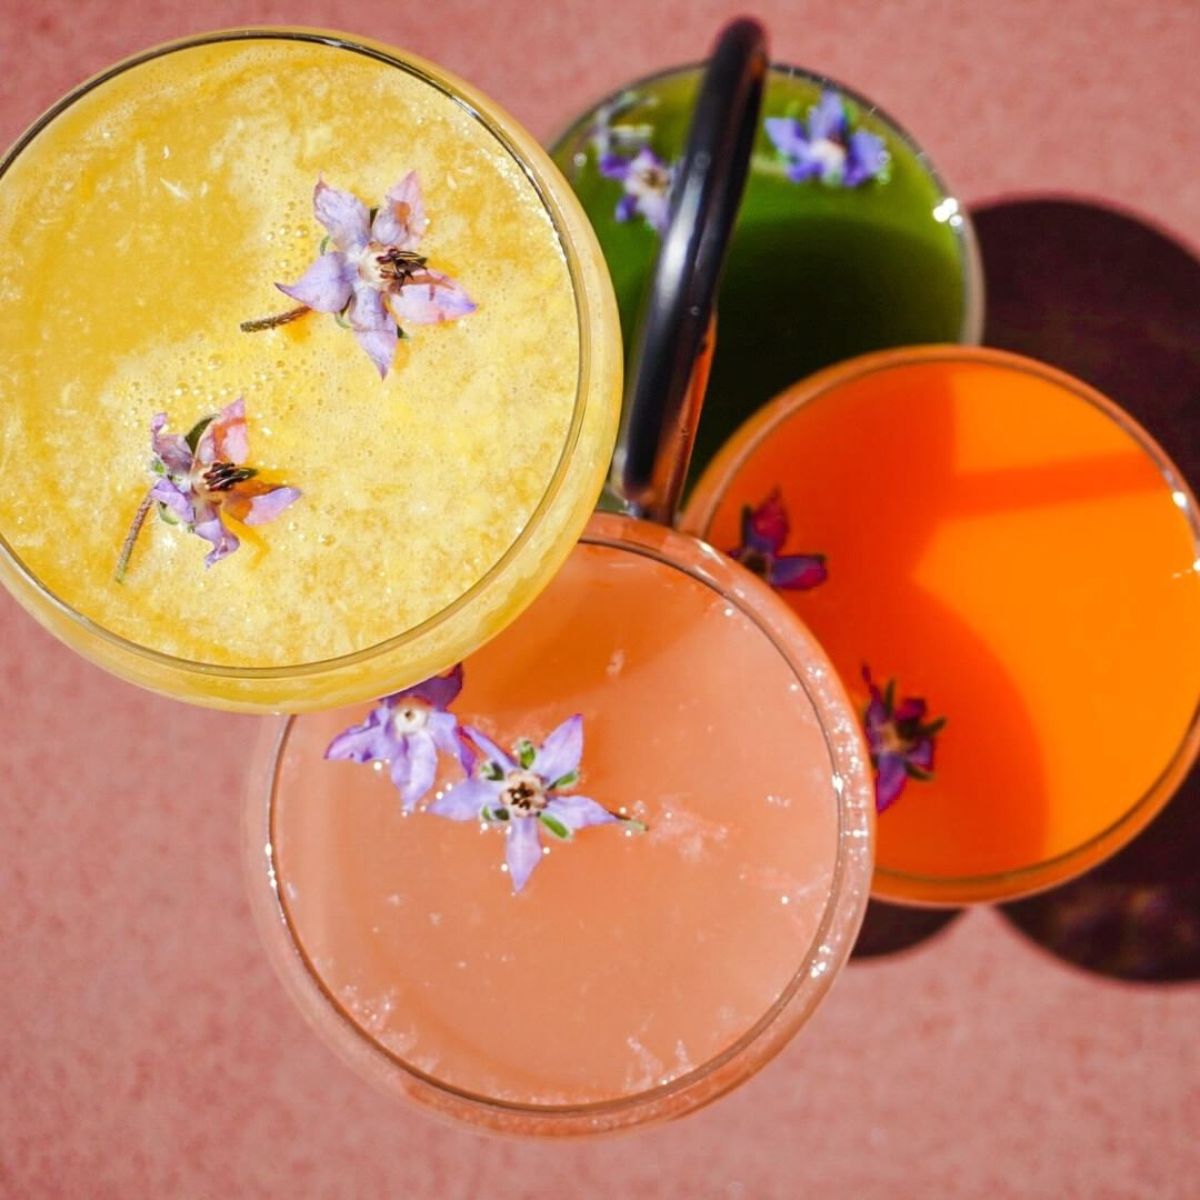 Ways to celebrate National Mimosa Day